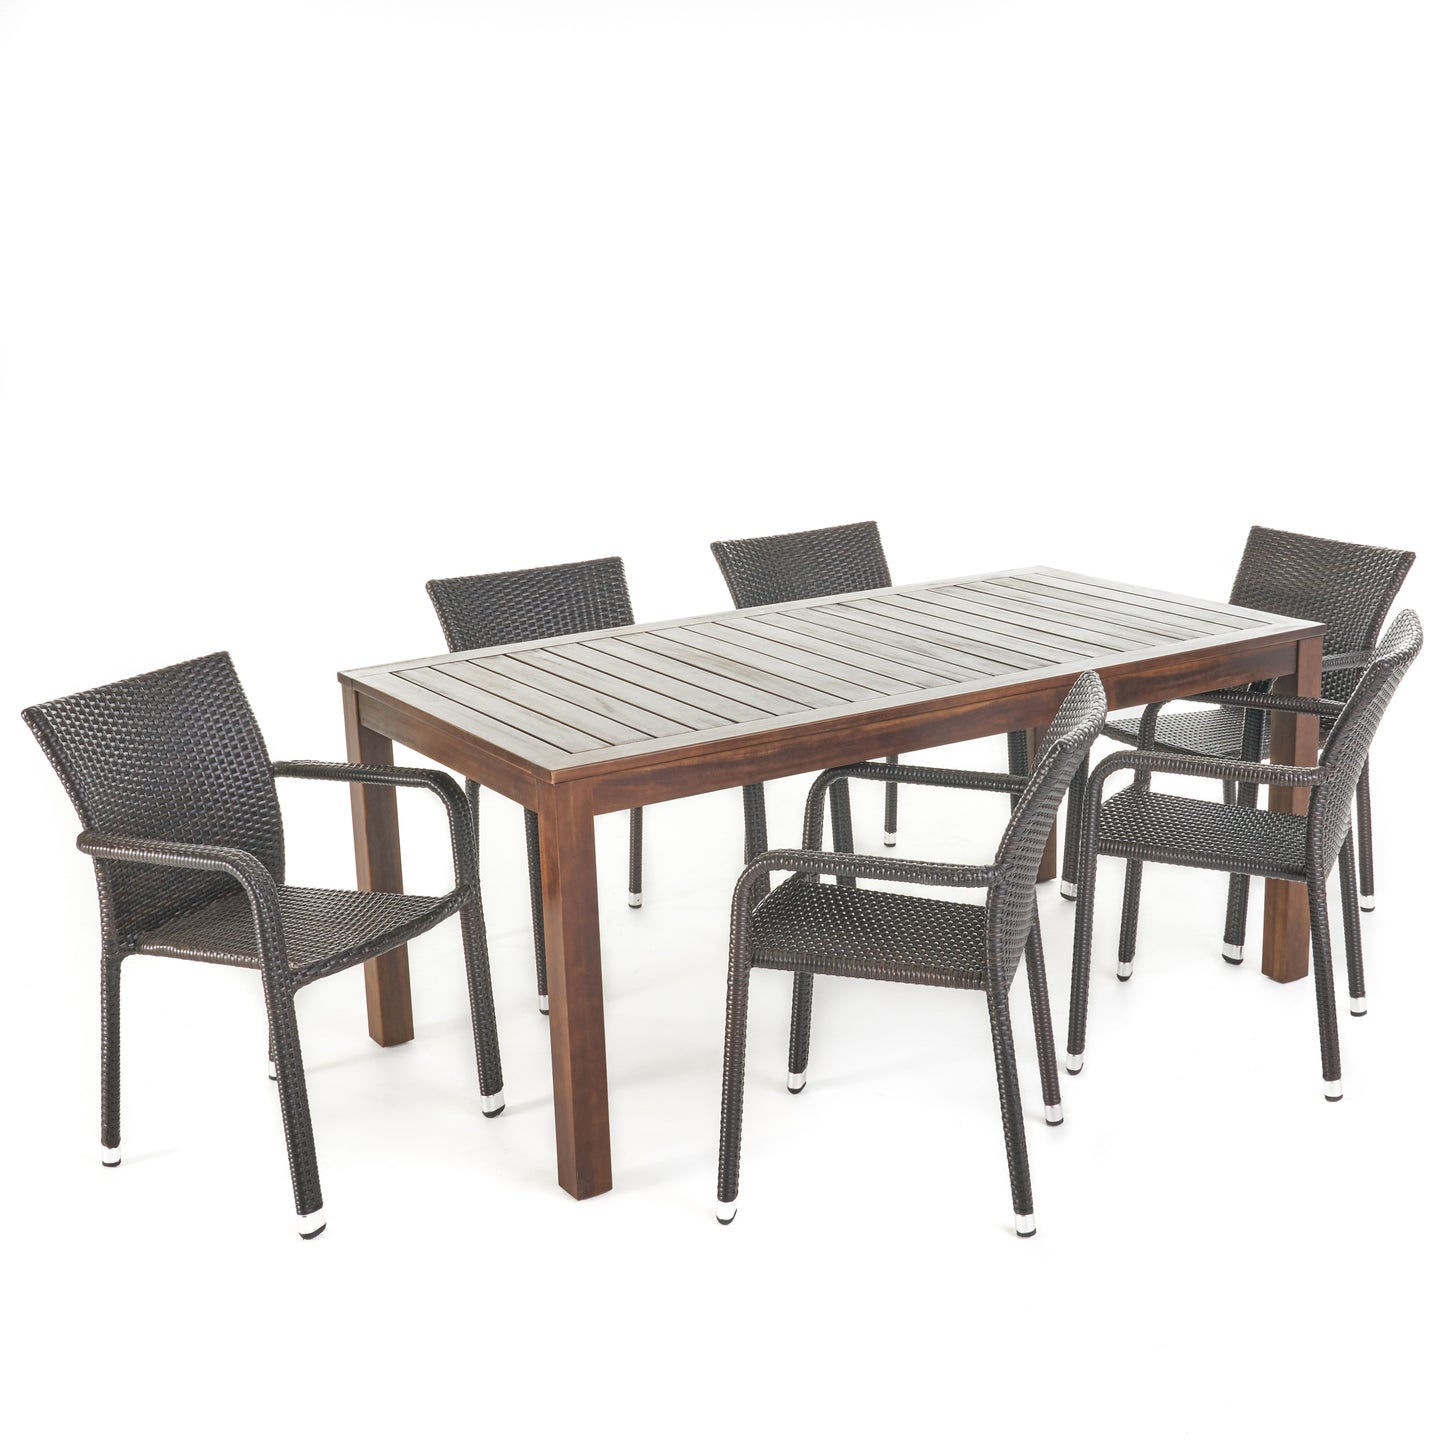 Netton Outdoor 7 Piece Dining Set with Dark Brown Finished Wood Table and Chairs